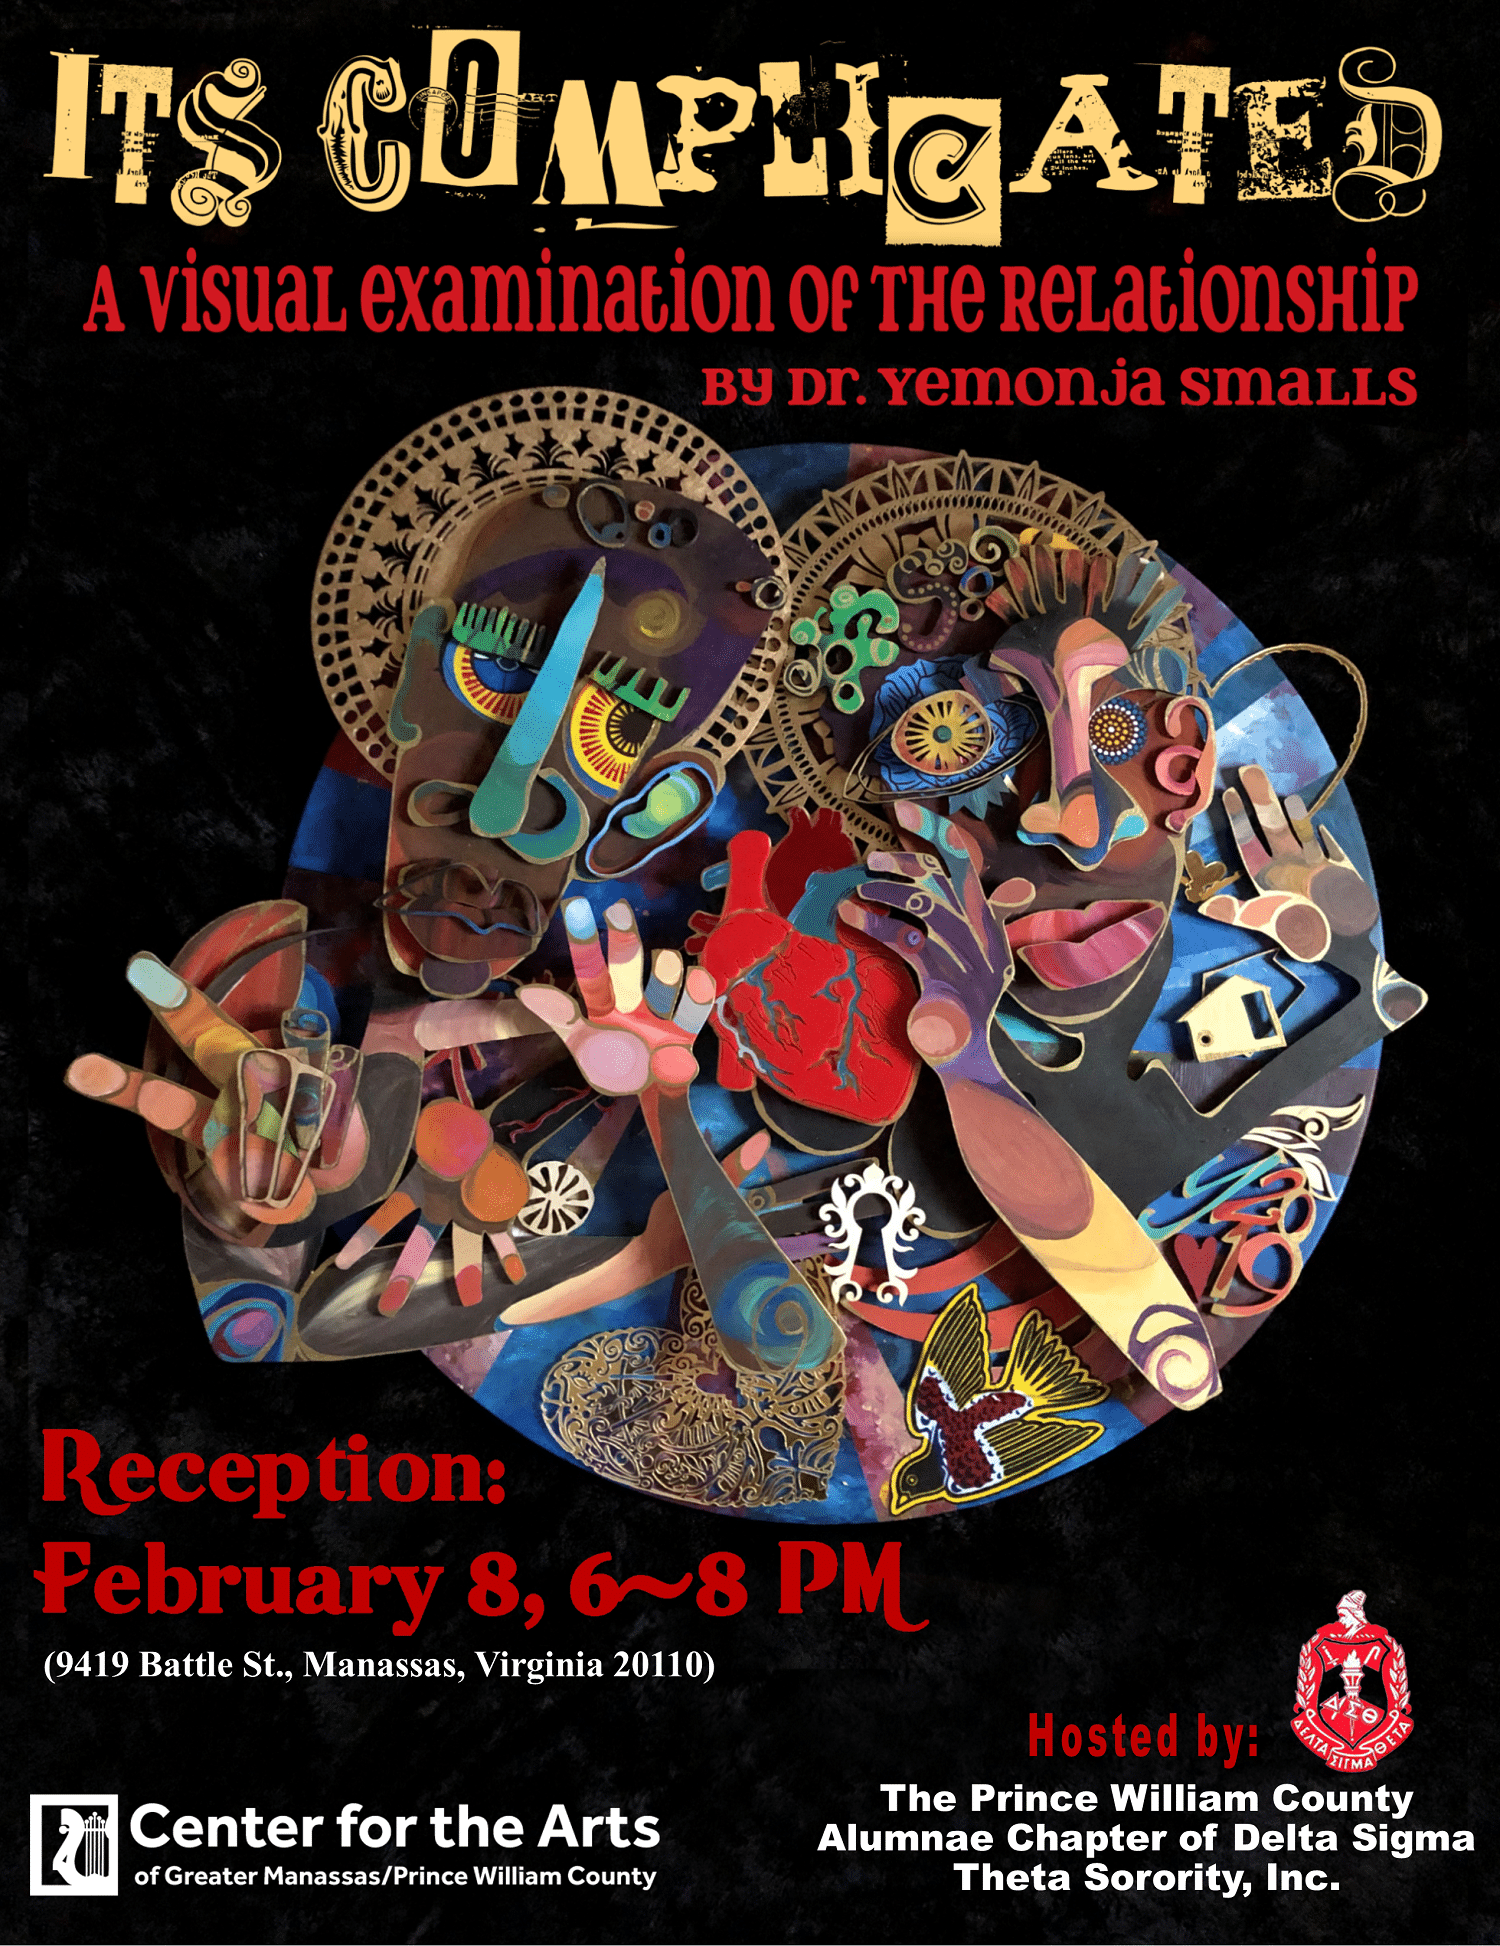 It's complicated featuring artist Dr. Yemonja Smalls